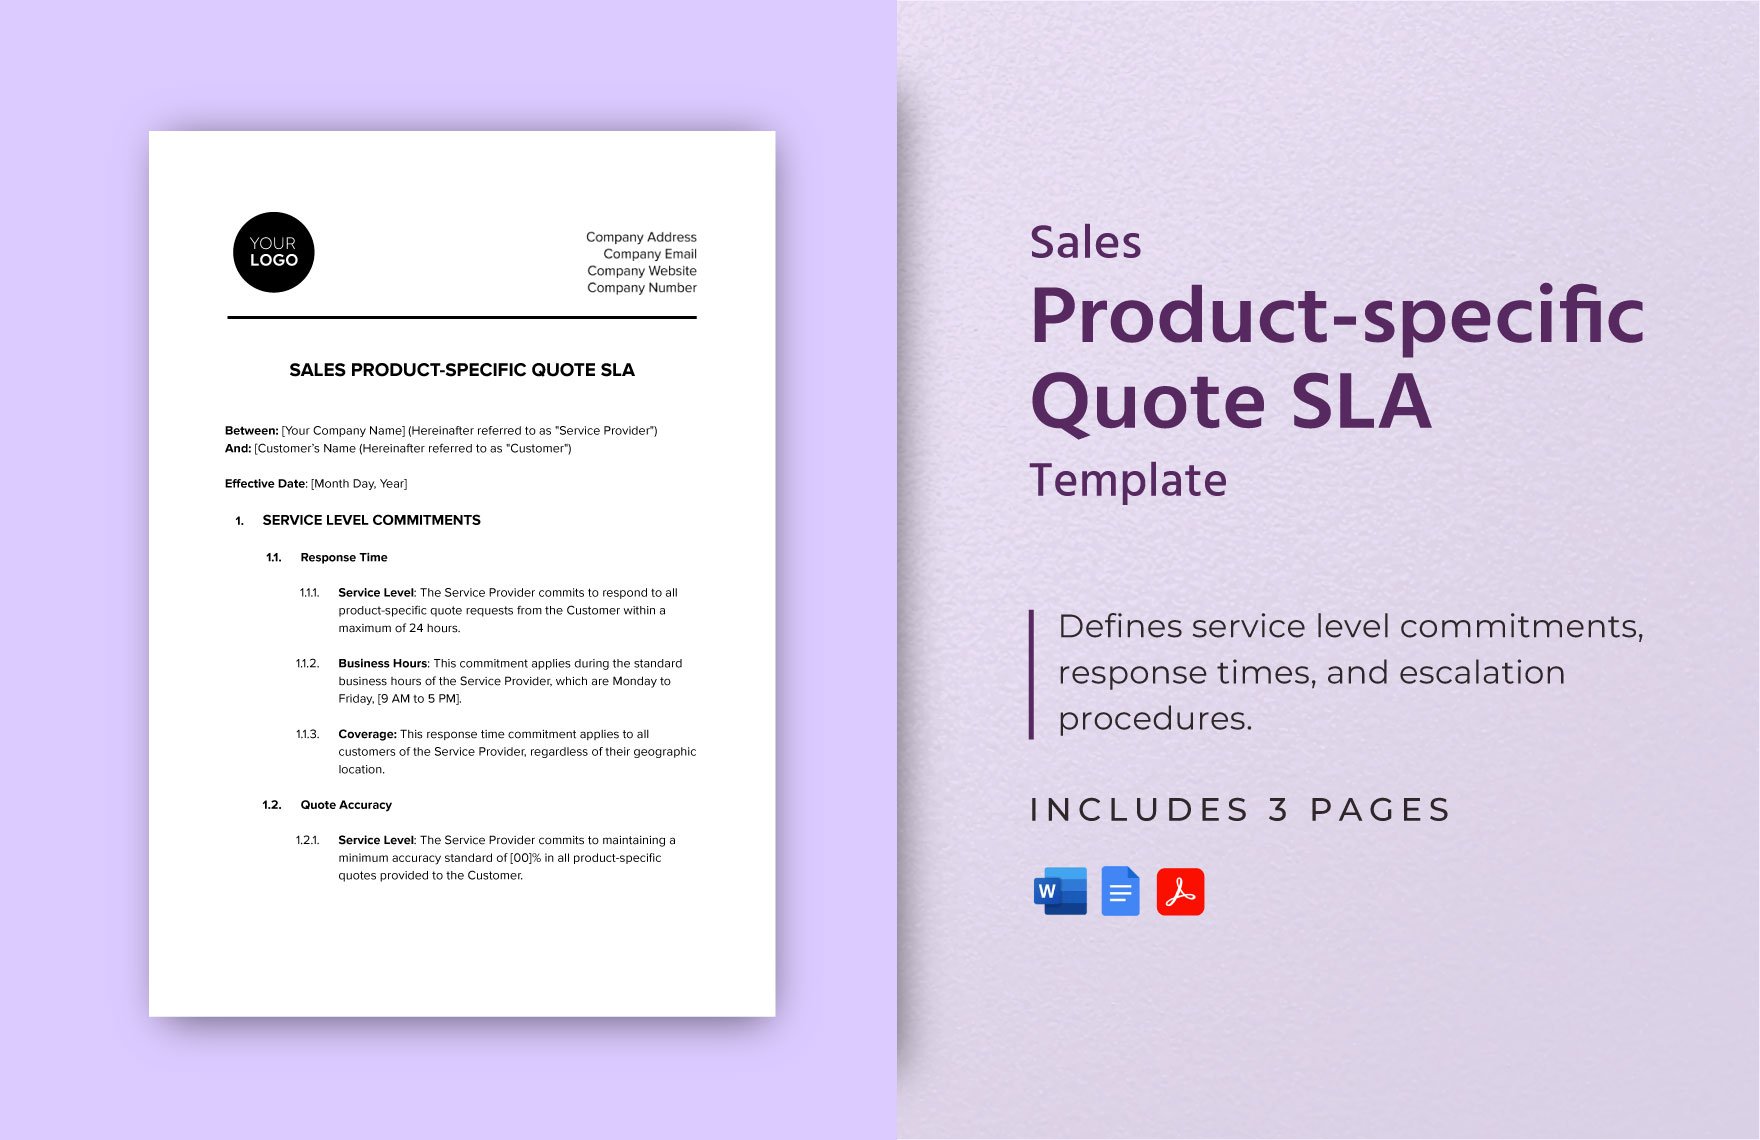 Sales Product-specific Quote SLA Template